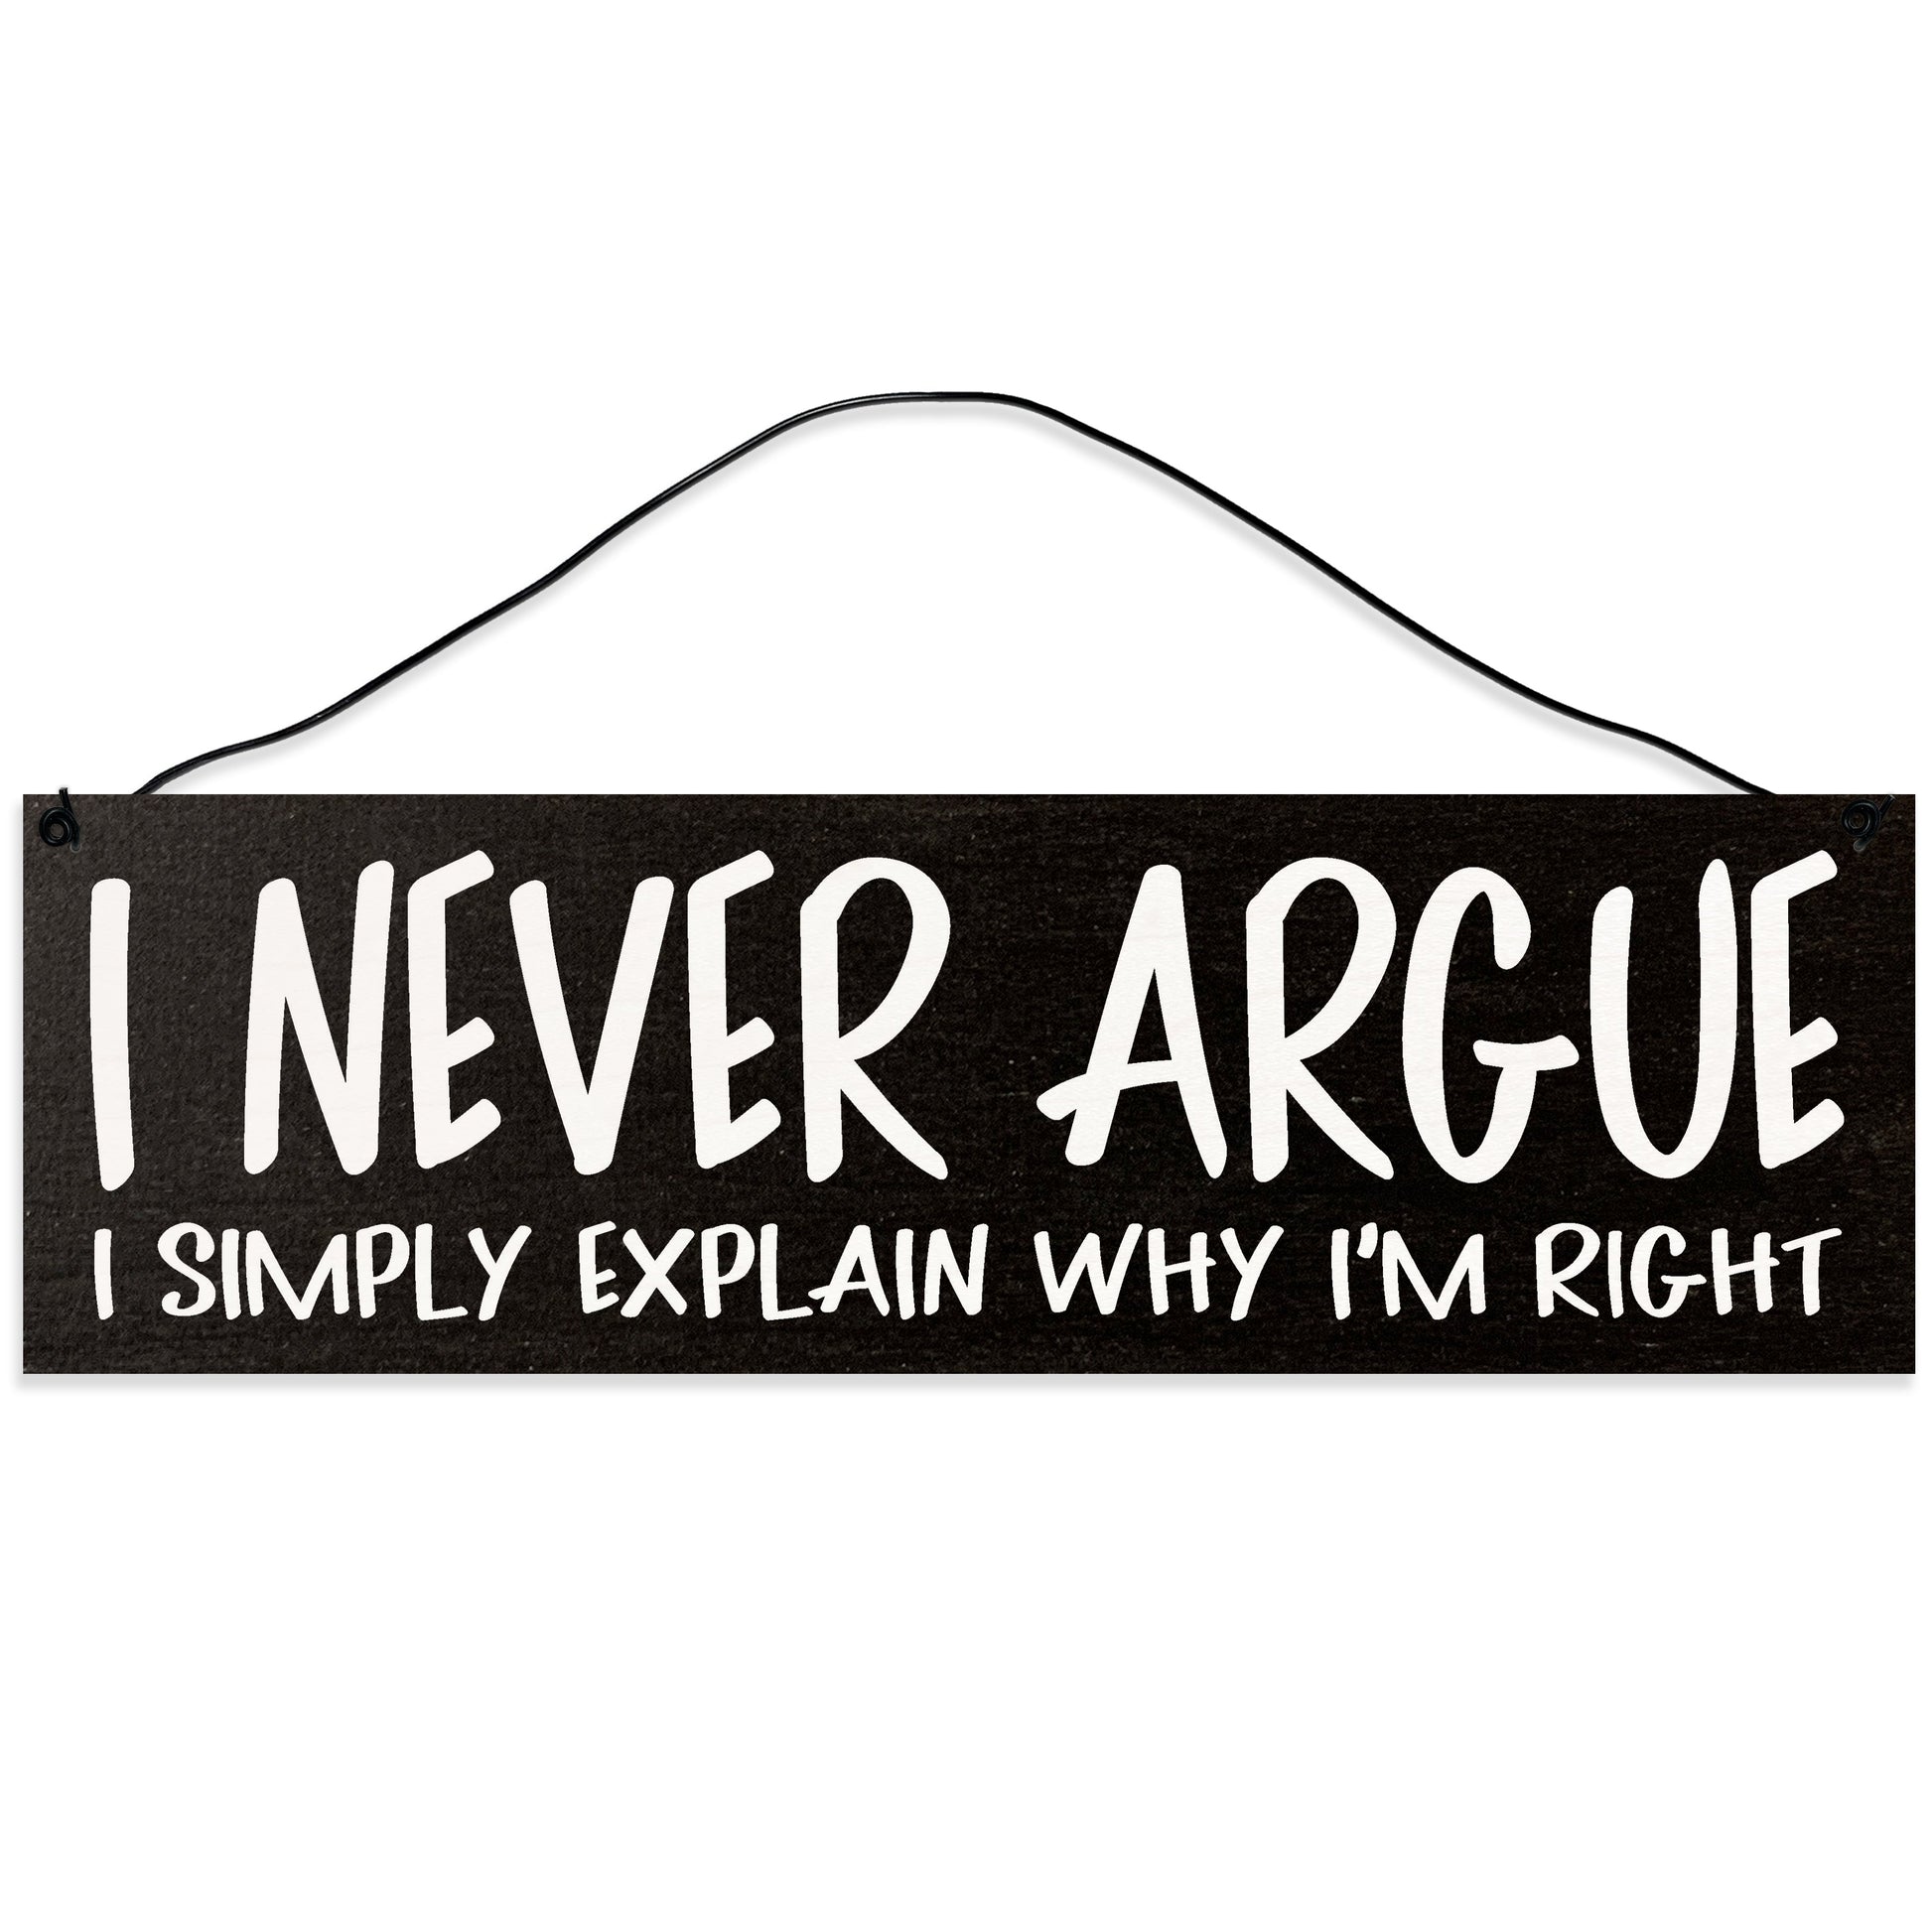 Sawyer's Mill - I Never Argue. I explain why I'm right. Wood Sign for Home or Office. Measures 3x10 inches.